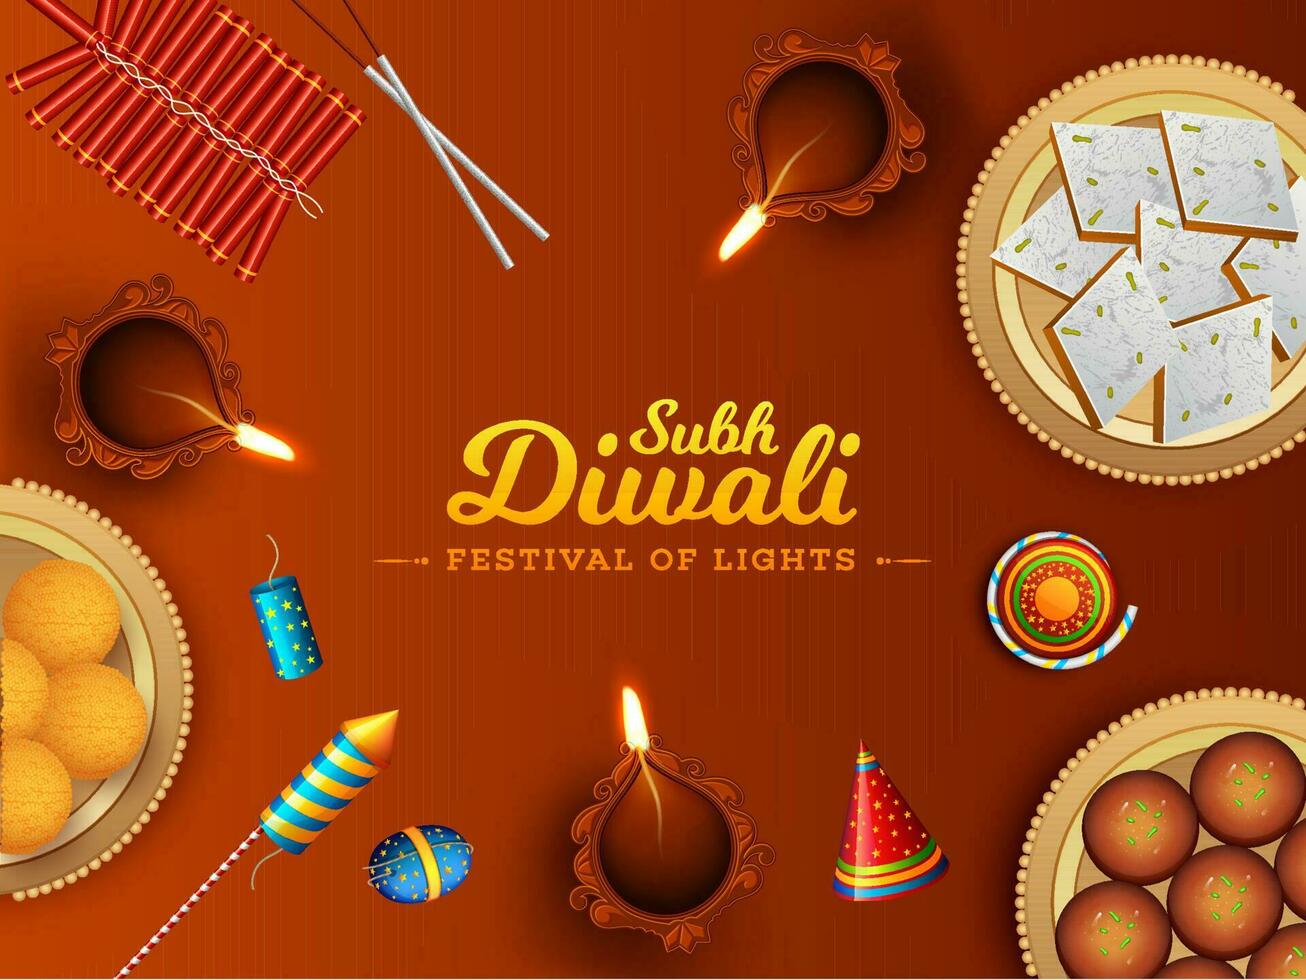 Top view of sweets with firecrackers and illuminated oil lamp decorated on brown background for Festival of Lights, Subh Diwali celebration concept. vector